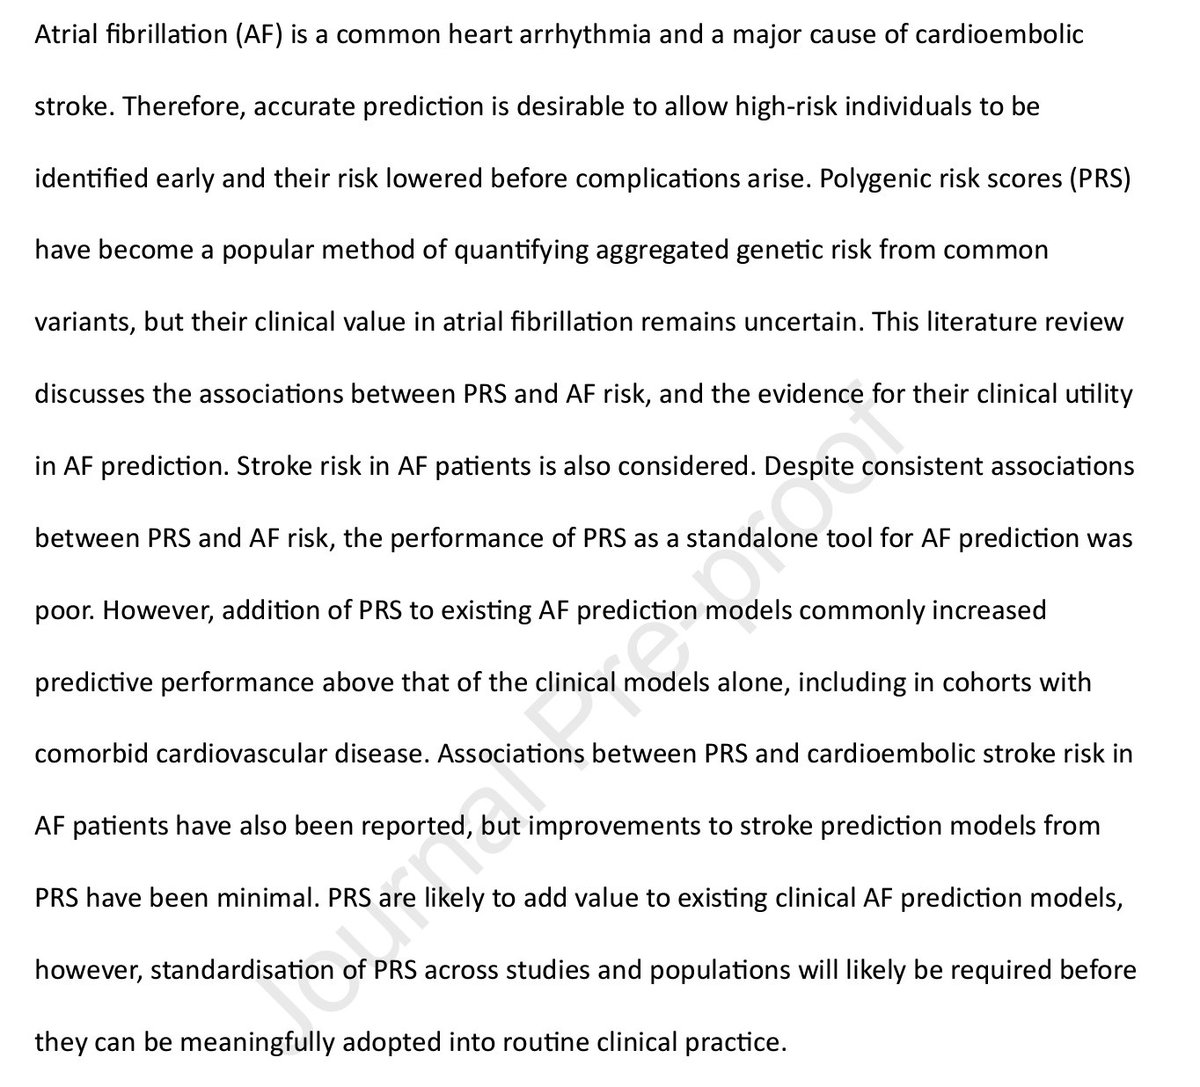 Polygenic risk scores in atrial fibrillation: associations and clinical utility in disease prediction heartrhythmjournal.com/article/S1547-… Well done Joel Gibson (who recently joined the @PGSCatalog team) & @jhfrudd!